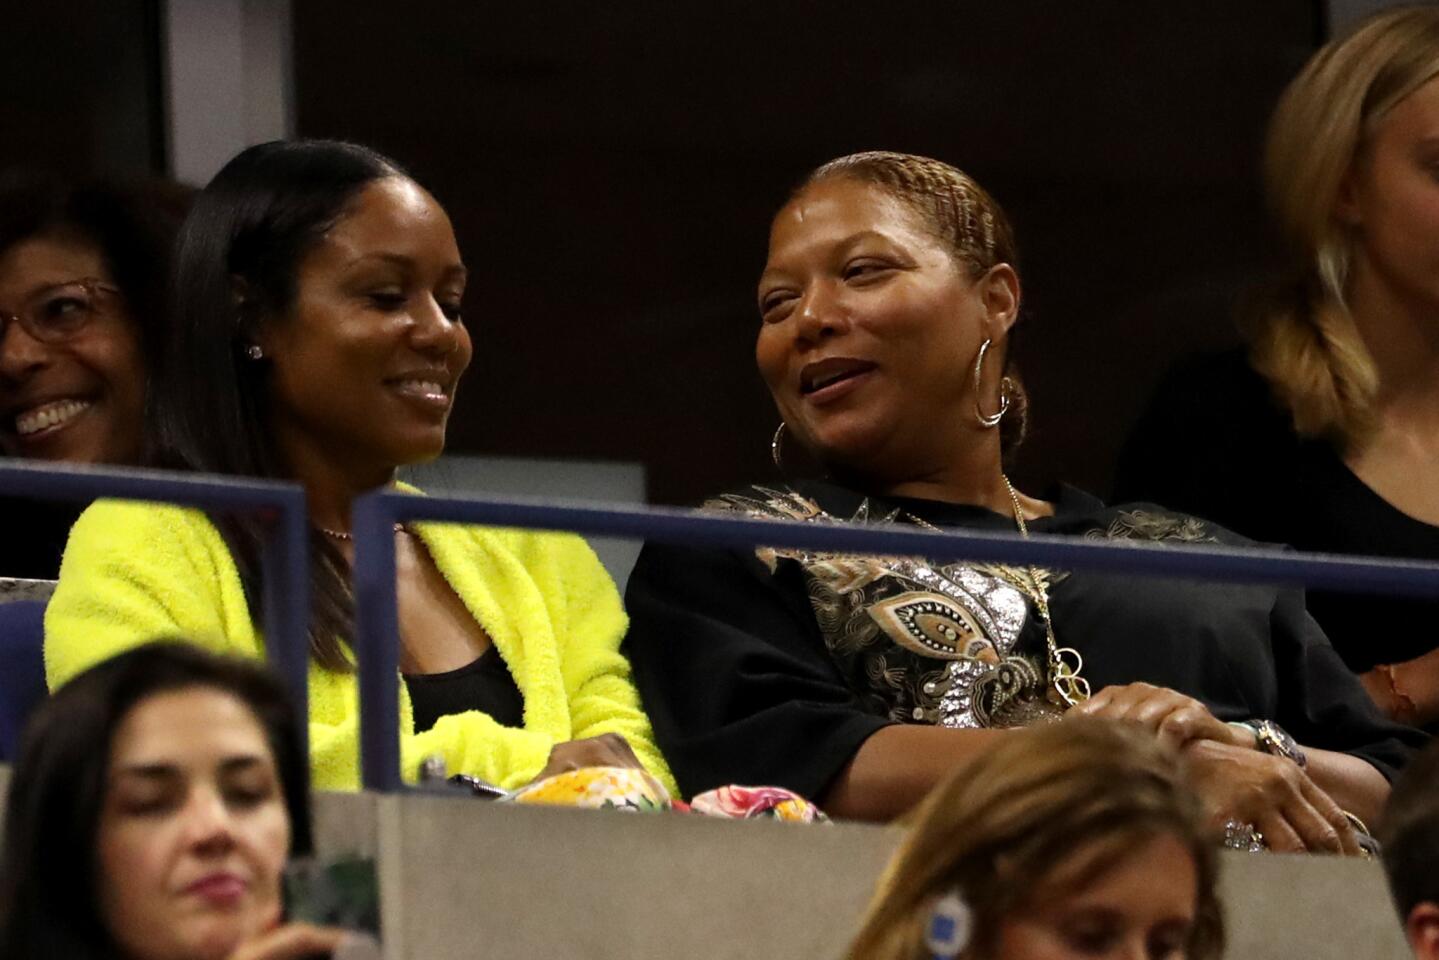 Queen Latifah attends the Men's Singles second-round match between Novak Djokovic of Serbia and Juan Ignacio Londero of Argentina on day three of the 2019 U.S. Open at the USTA Billie Jean King National Tennis Center on Aug. 28, 2019, in Queens.